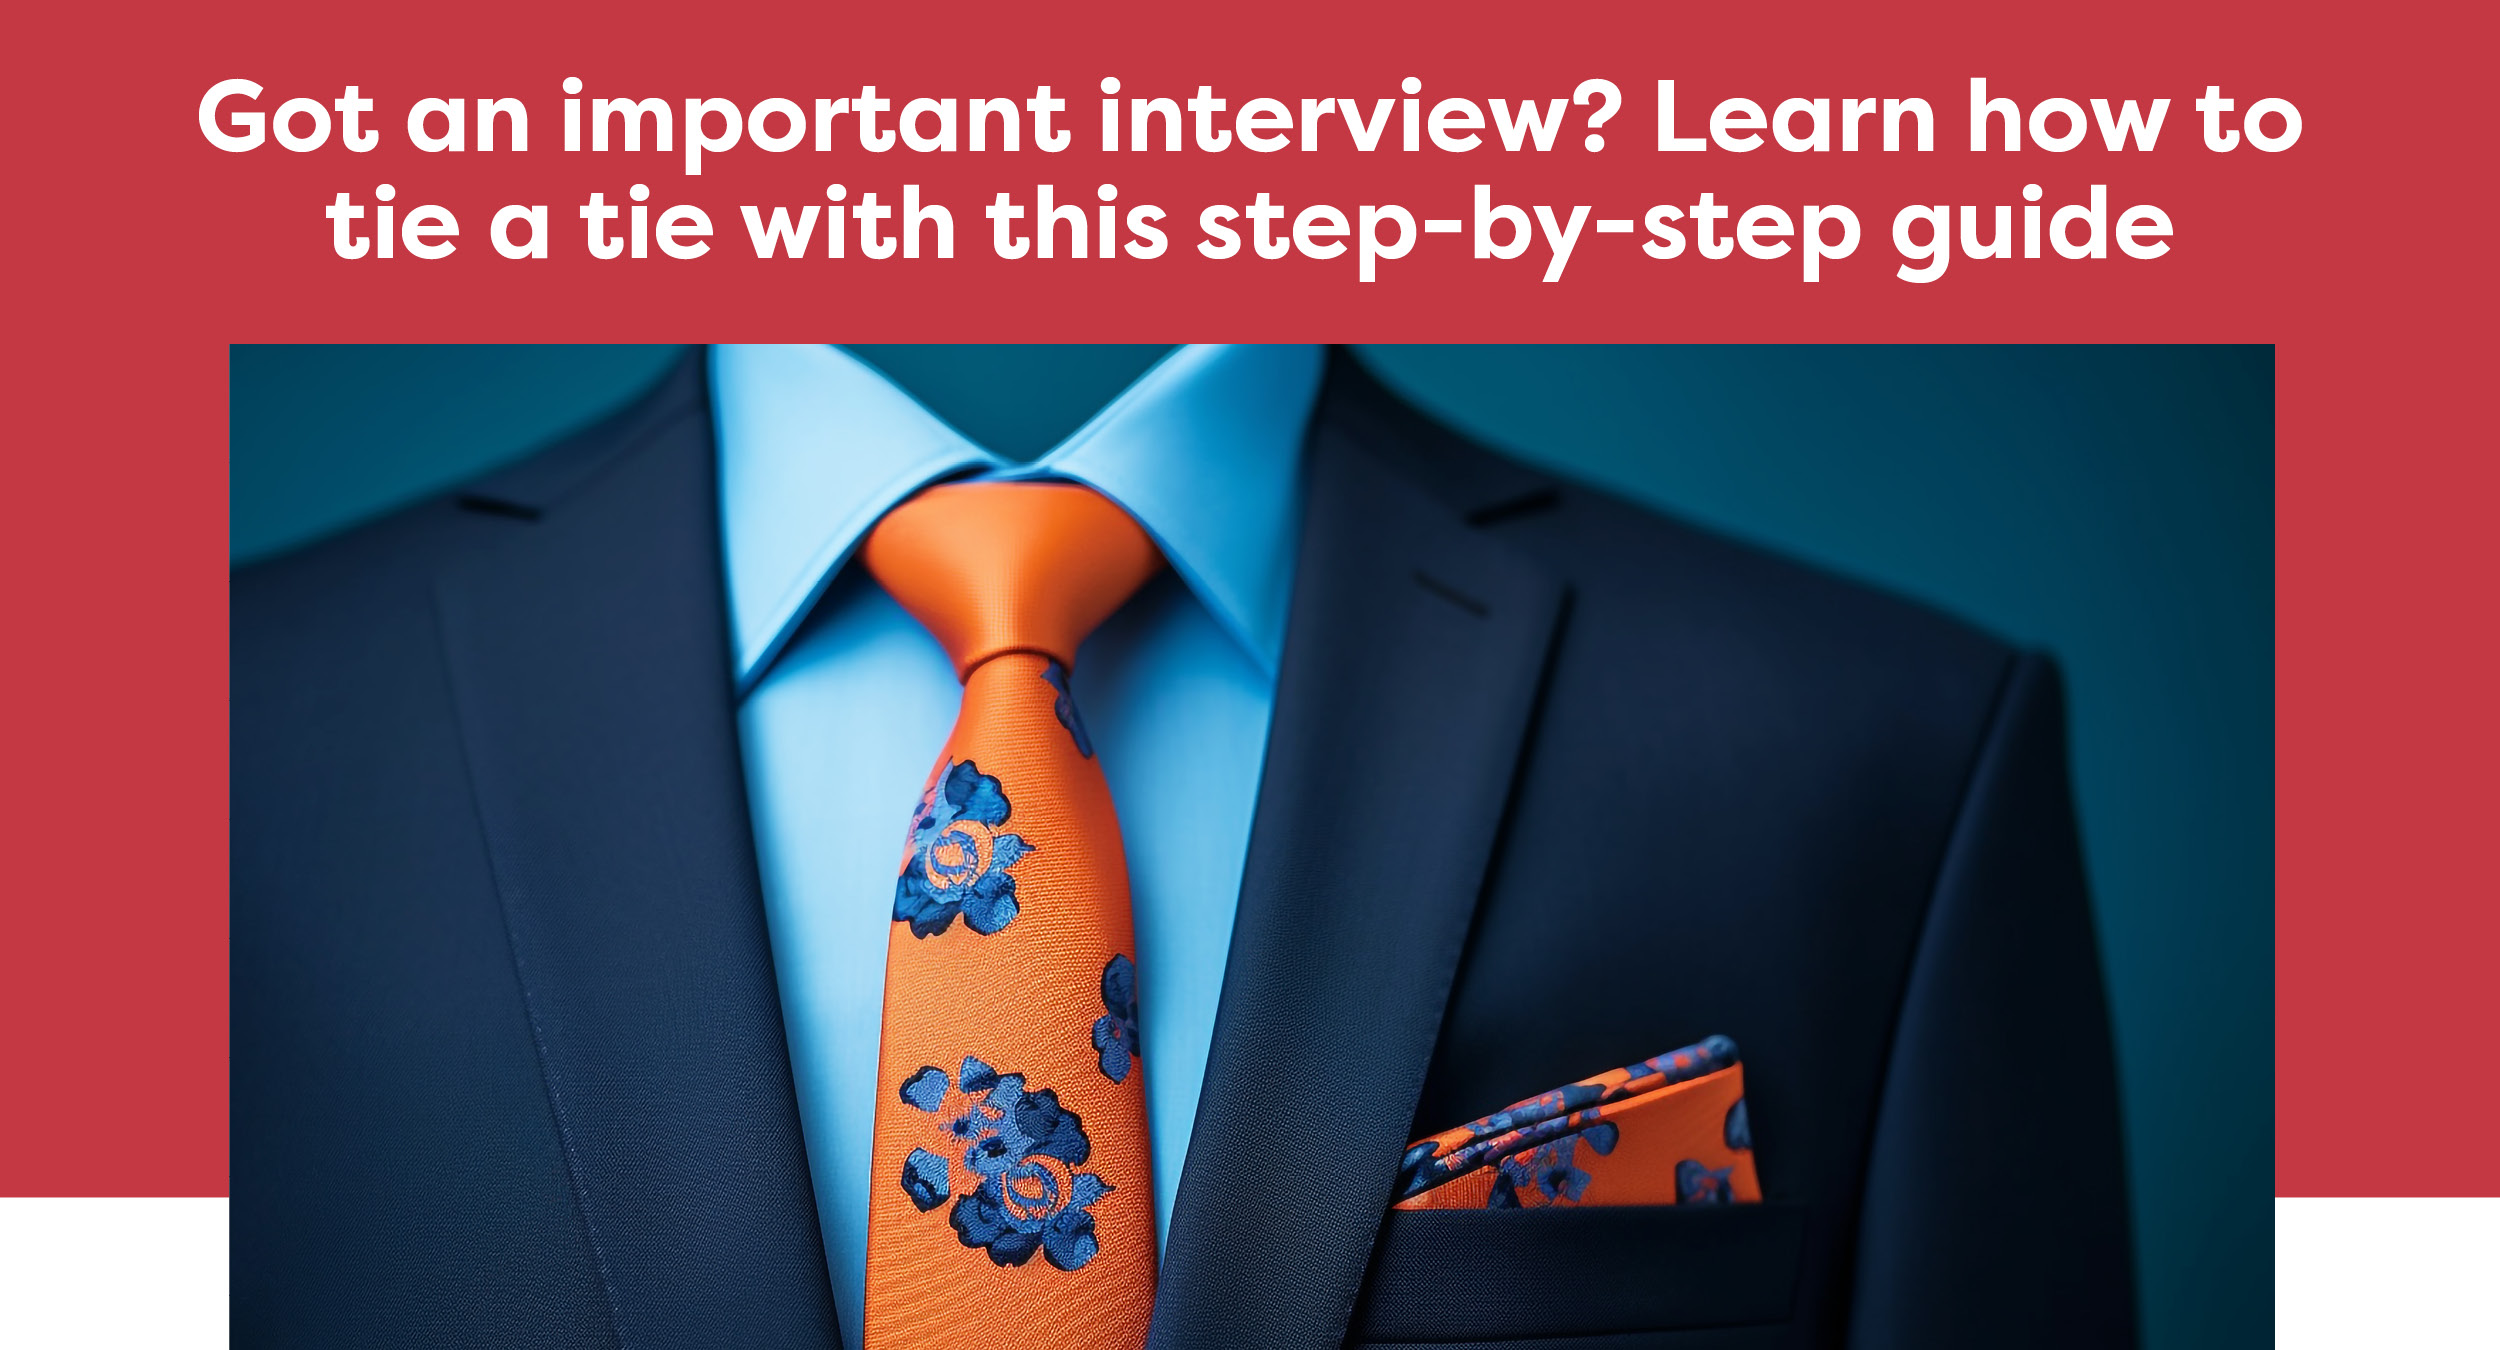 Got an important interview? Learn how to tie a tie with this step-by-step guide